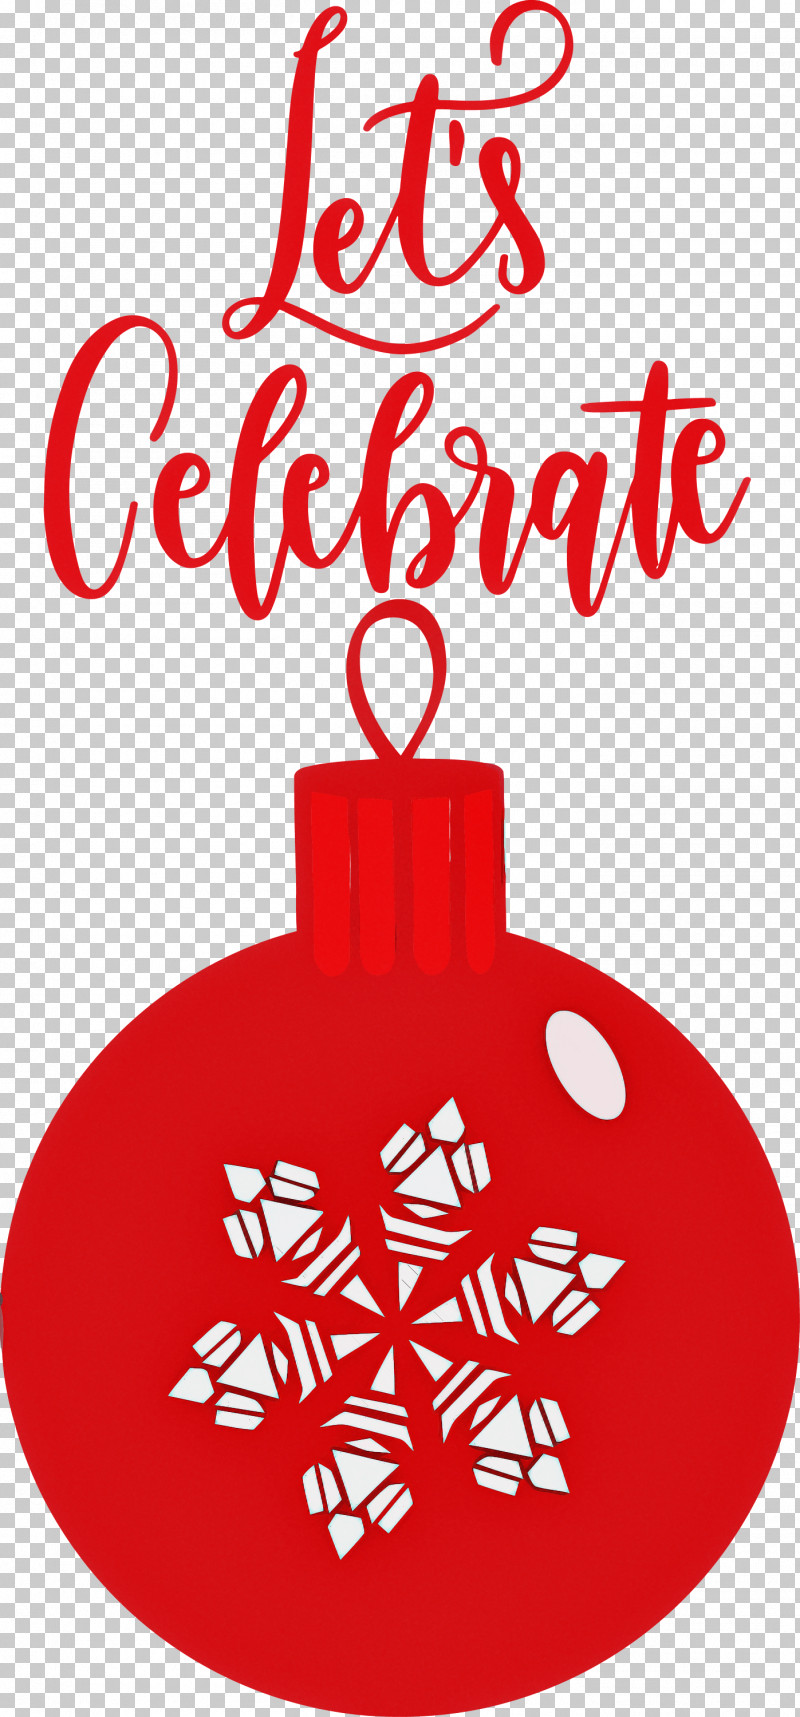 Lets Celebrate Celebrate PNG, Clipart, Celebrate, Christmas Day, Christmas Ornament, Christmas Ornament M, Christmas Tree Free PNG Download